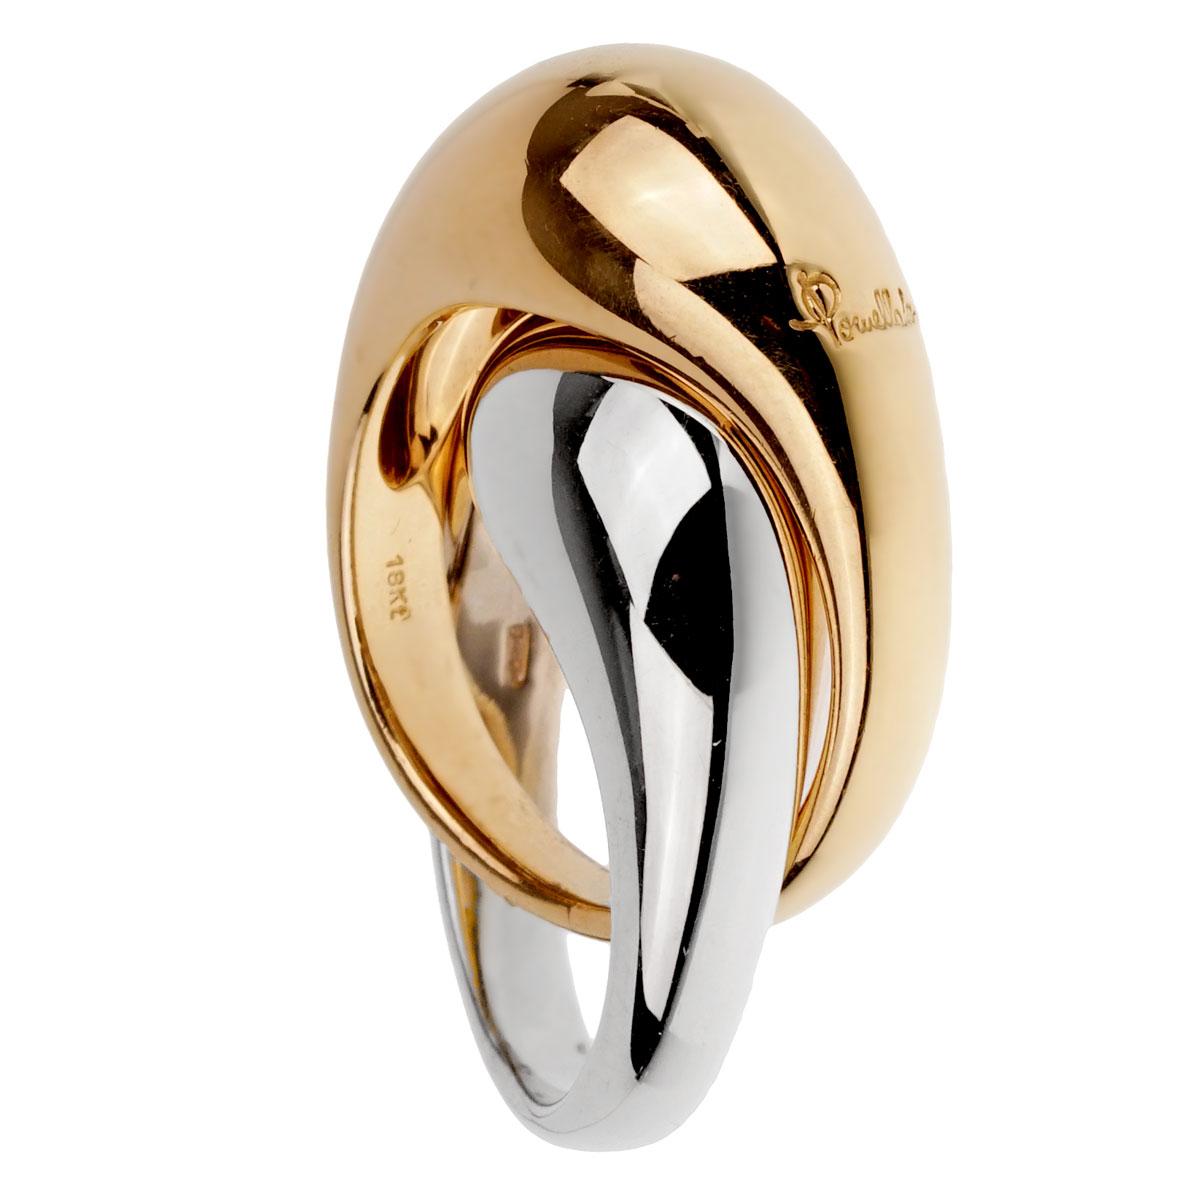 Two smooth gold rings come together to form one stunning piece in the two tone gold cocktail ring from Pomellato. High polished yellow and white gold puffed, rounded bands sit alongside each other for a more substantial look. The width of each